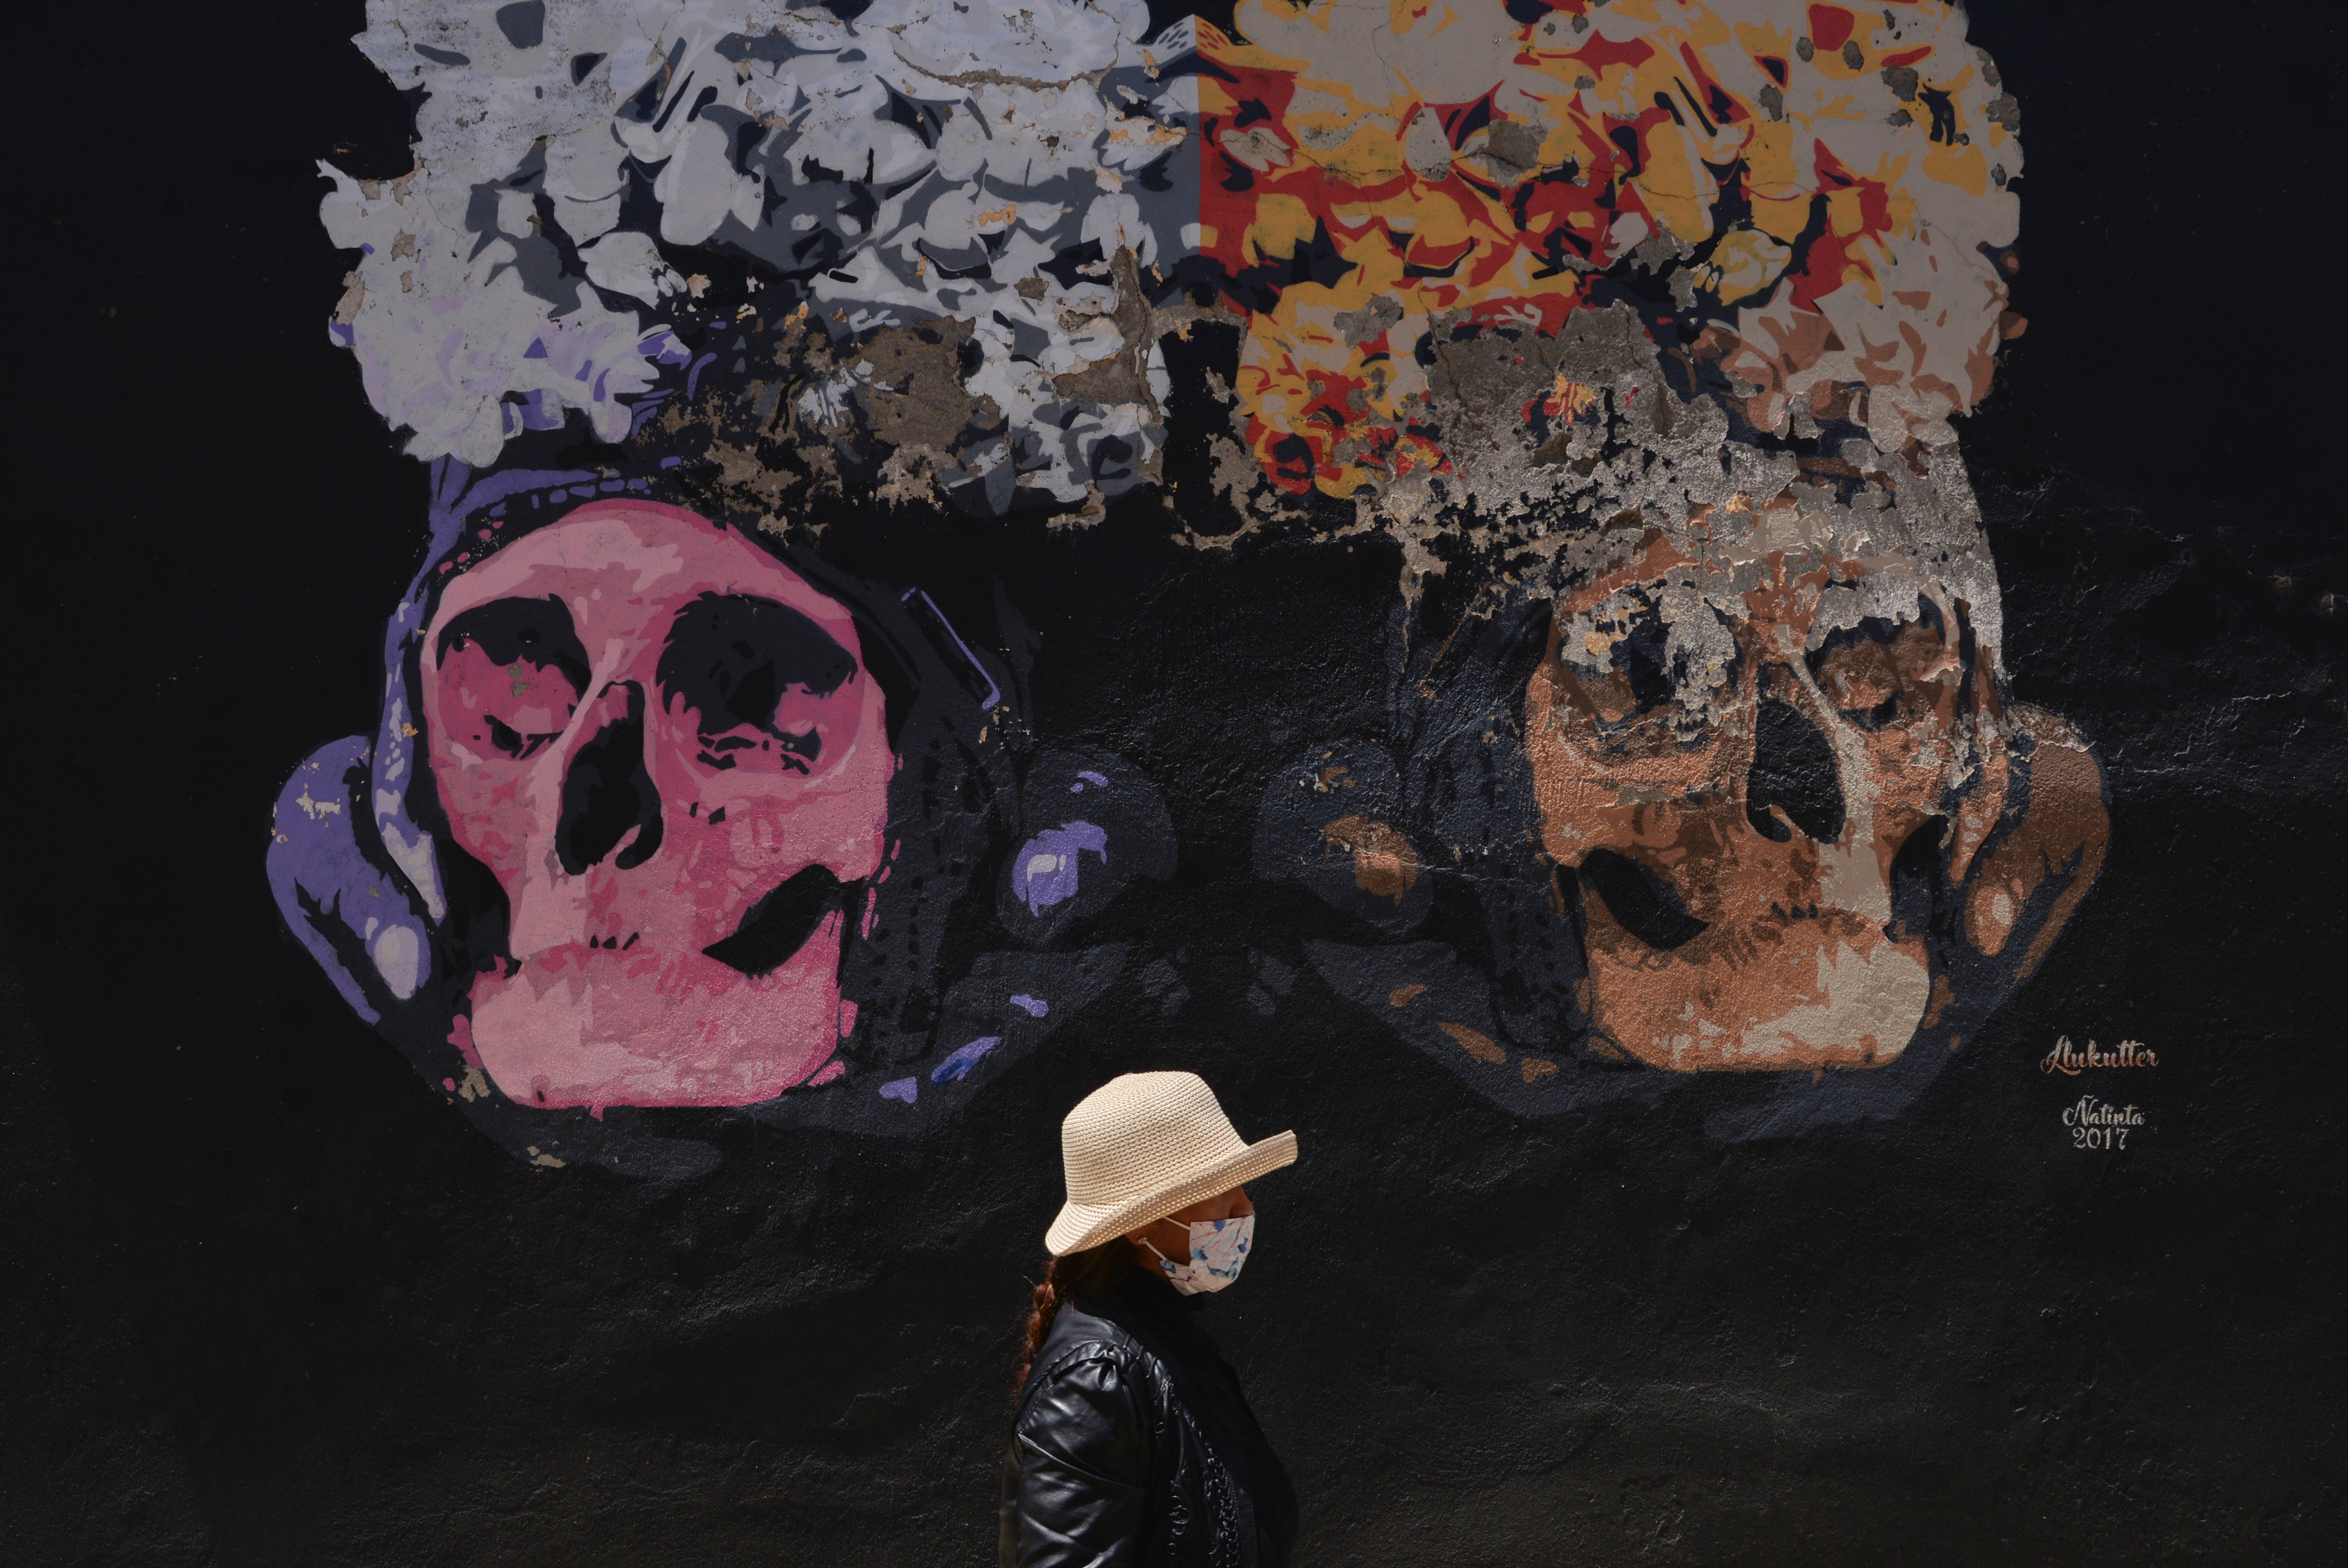 A woman walks in front of a mural of skulls during the celebration of the Day of Skulls, a tradition rooted in ancient indigenous beliefs meant to bring good fortune and protection by honoring the dead, at a cemetery in La Paz, Bolivia, November 8, 2021. REUTERS/Sara Aliaga  